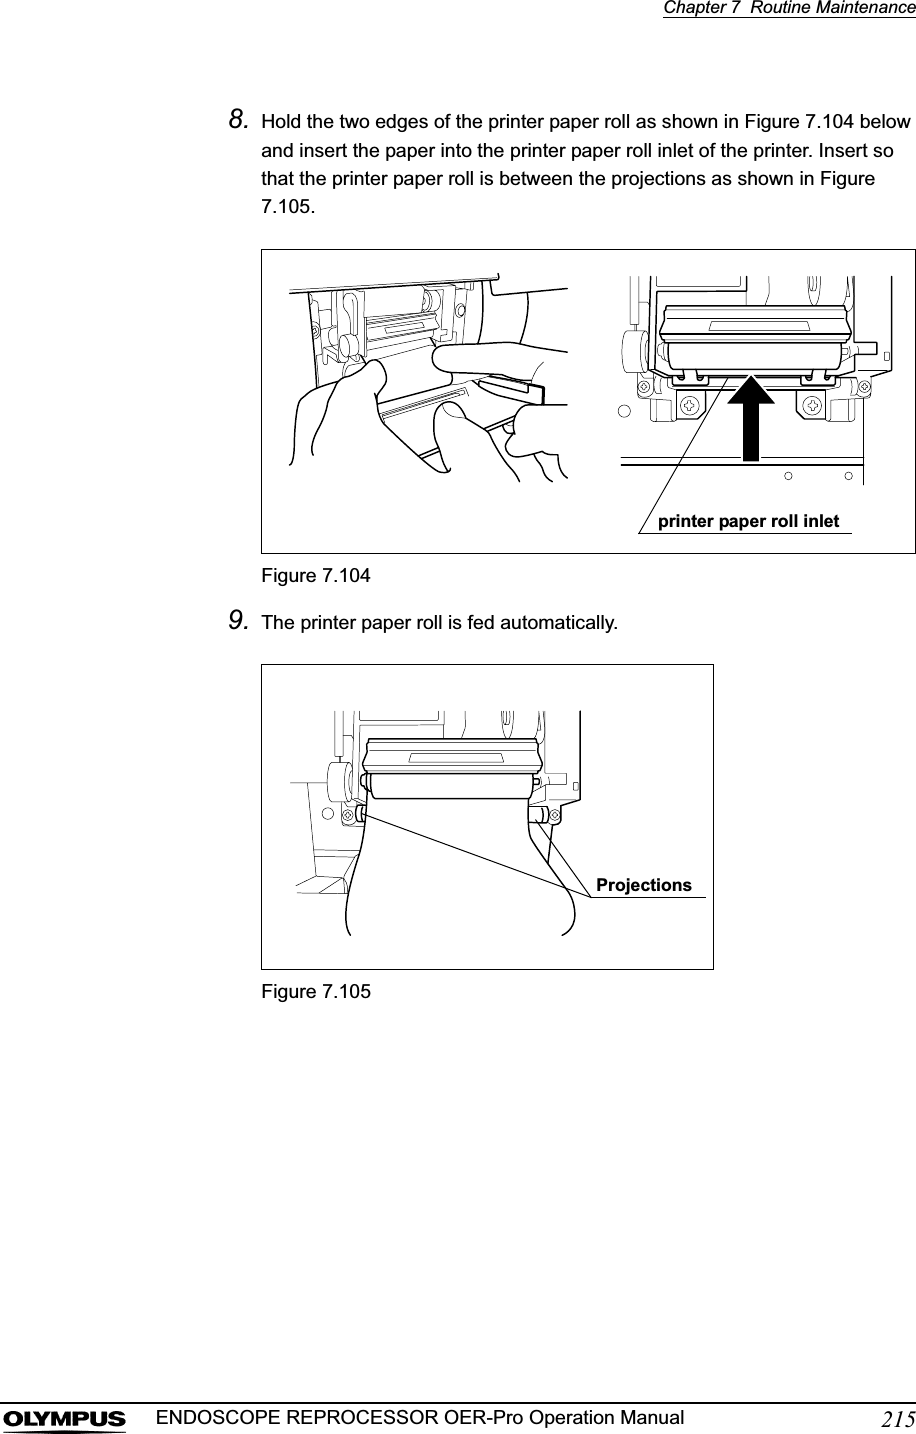 Chapter 7  Routine Maintenance215ENDOSCOPE REPROCESSOR OER-Pro Operation Manual8. Hold the two edges of the printer paper roll as shown in Figure 7.104 below and insert the paper into the printer paper roll inlet of the printer. Insert so that the printer paper roll is between the projections as shown in Figure 7.105.Figure 7.1049. The printer paper roll is fed automatically.Figure 7.105printer paper roll inletProjections